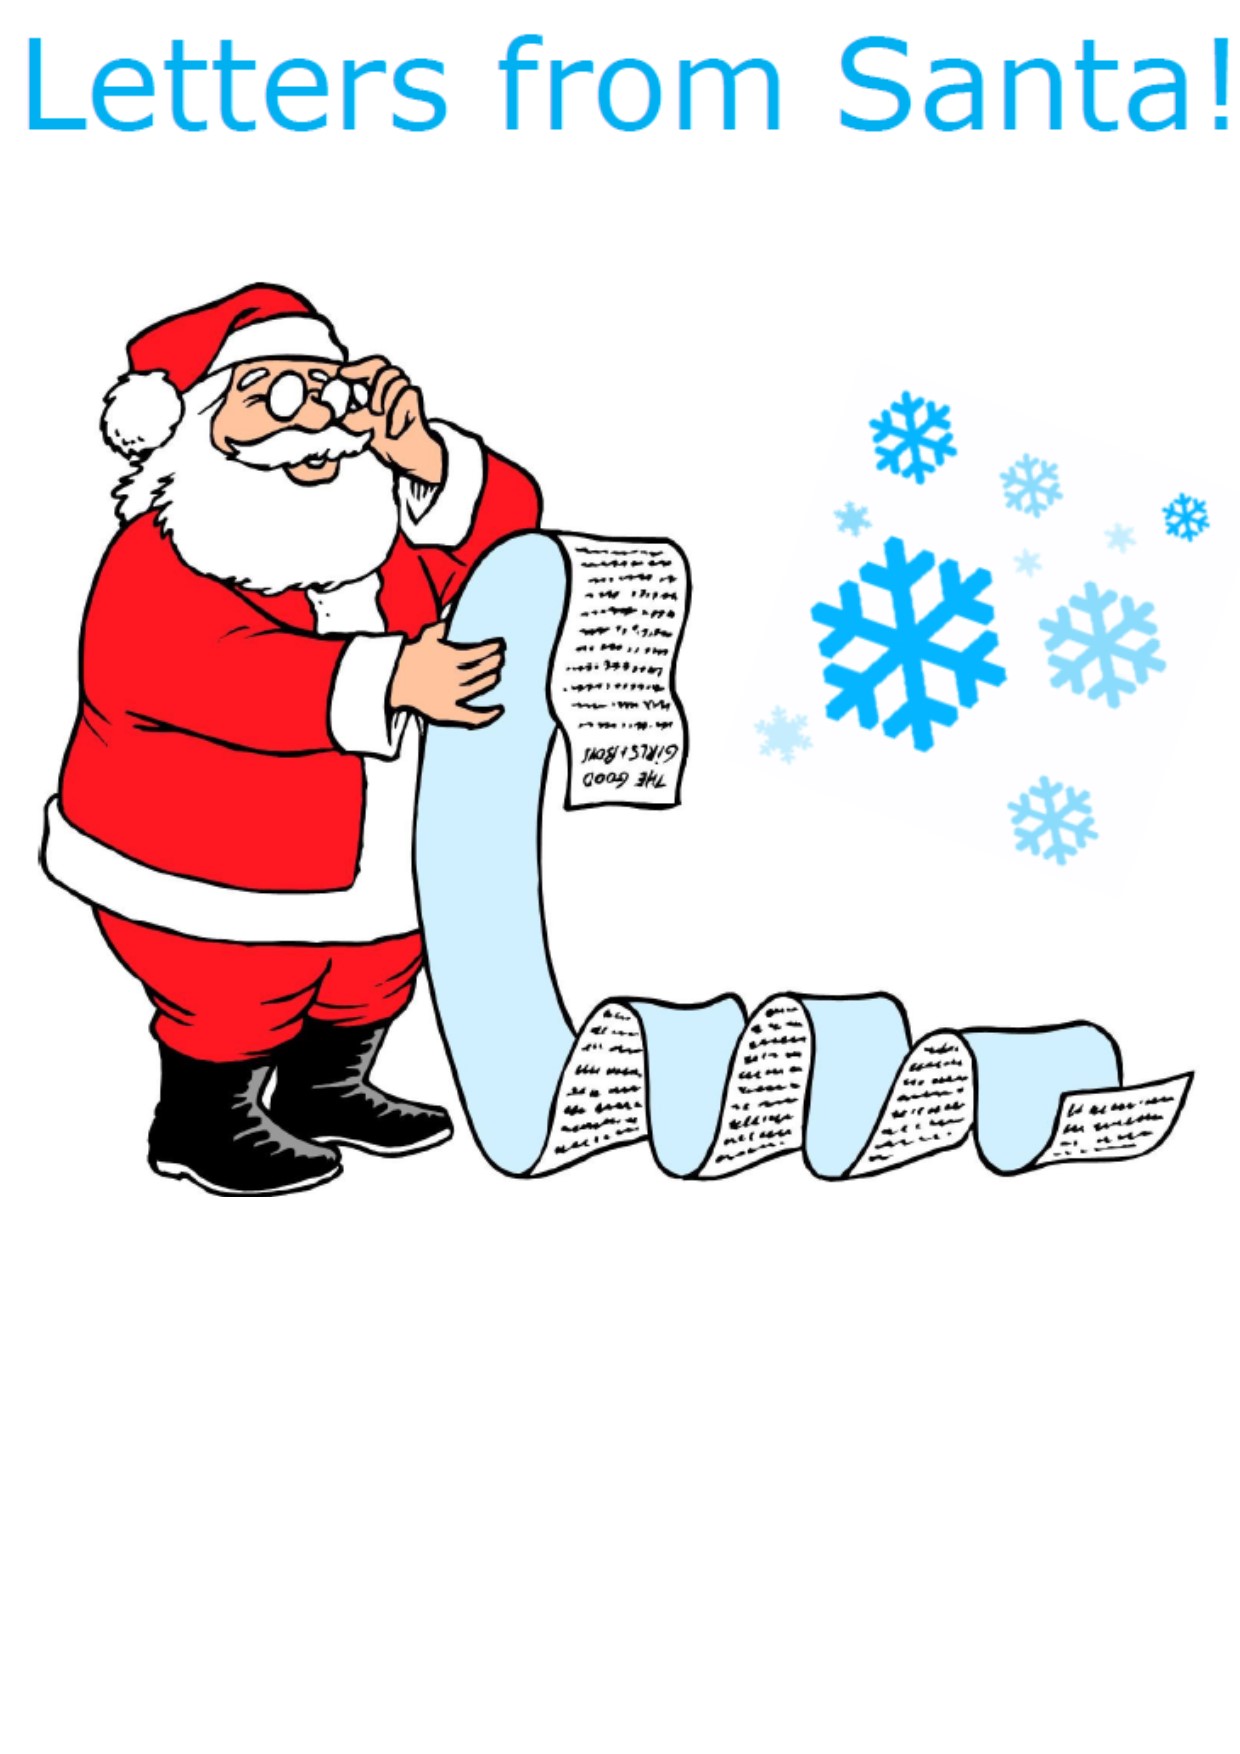 letters-from-santa-independent-options-north-west